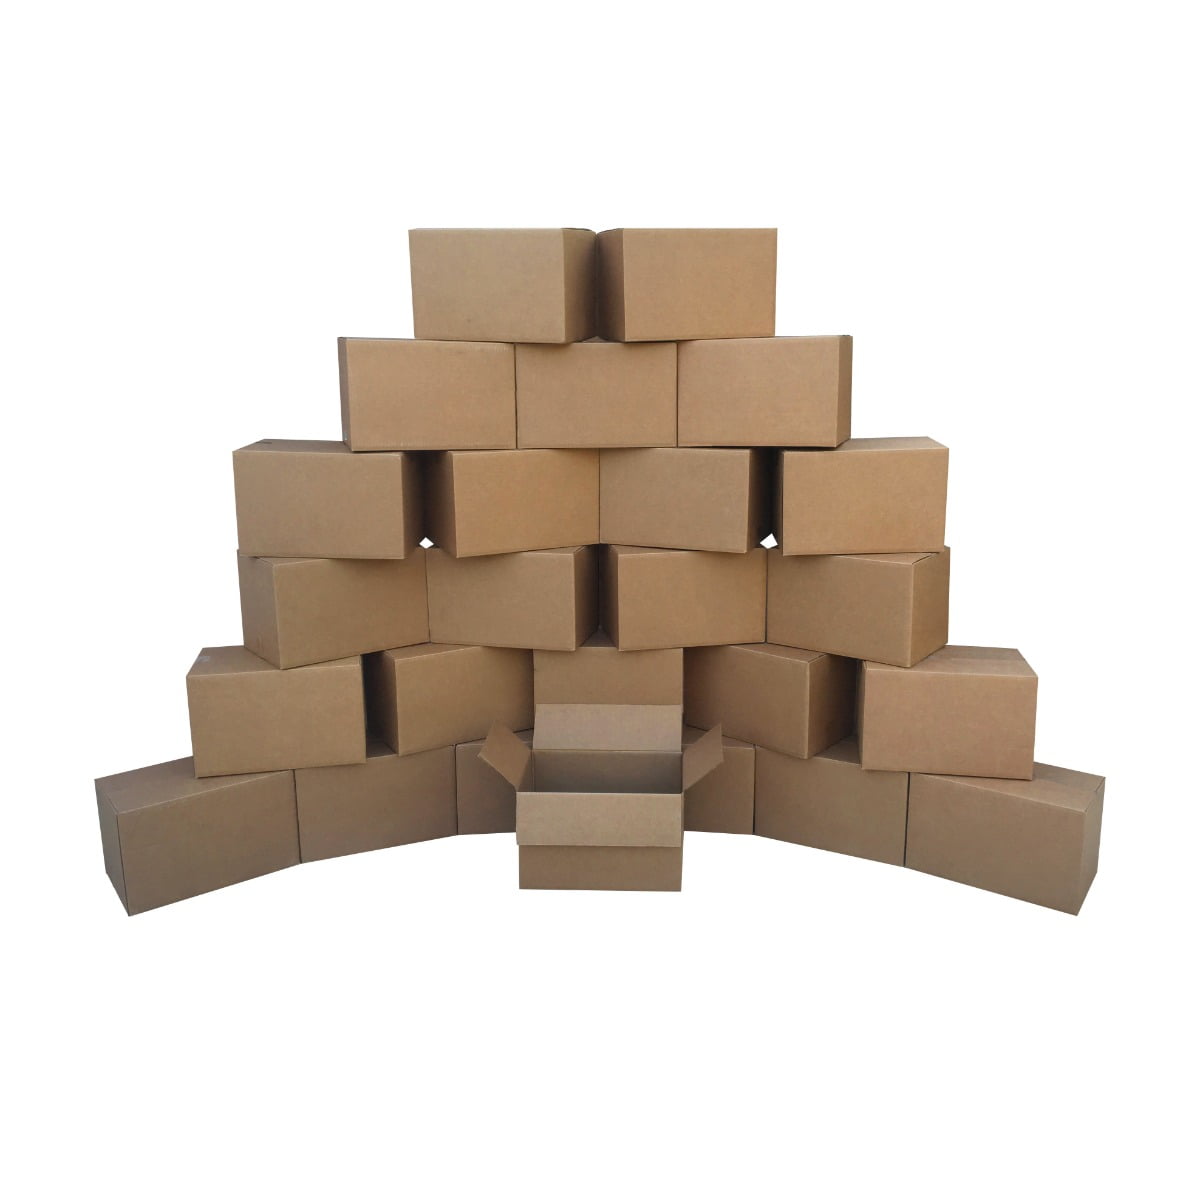 50 16x10x10 Cardboard SHIPPING BOXES Cartons Packing Moving Mailing Storage Box